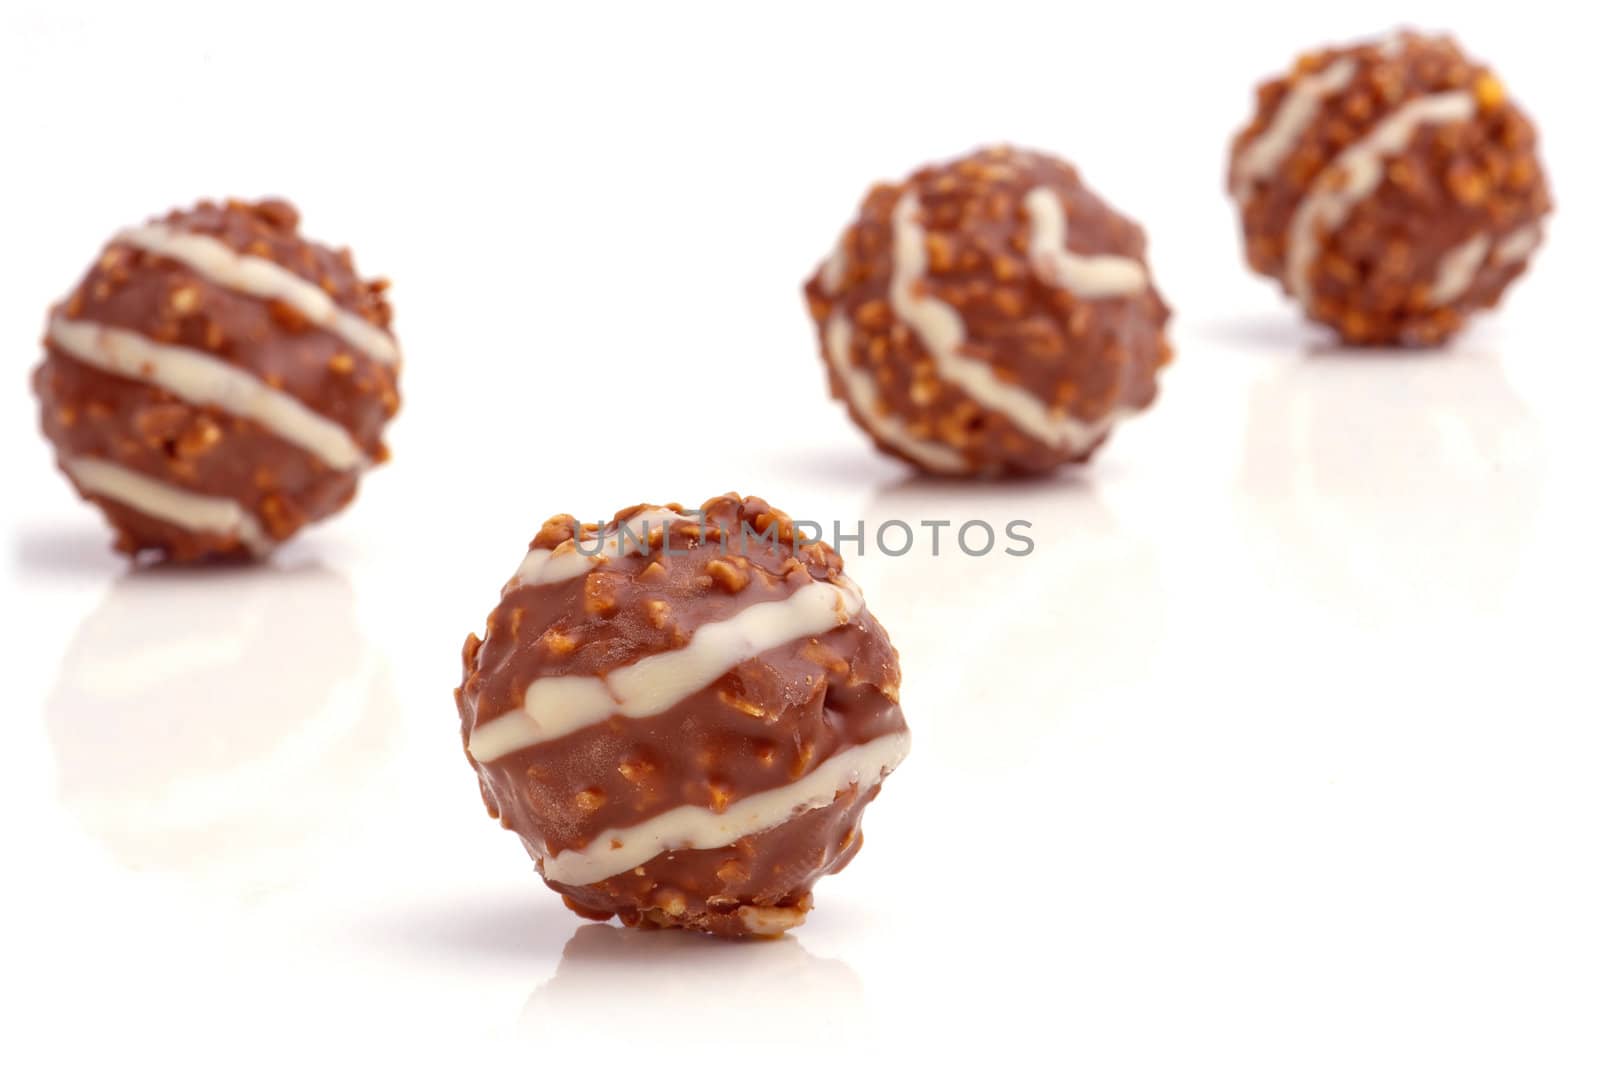 Sweet chocolate balls filled with hazelnuts on a white background.